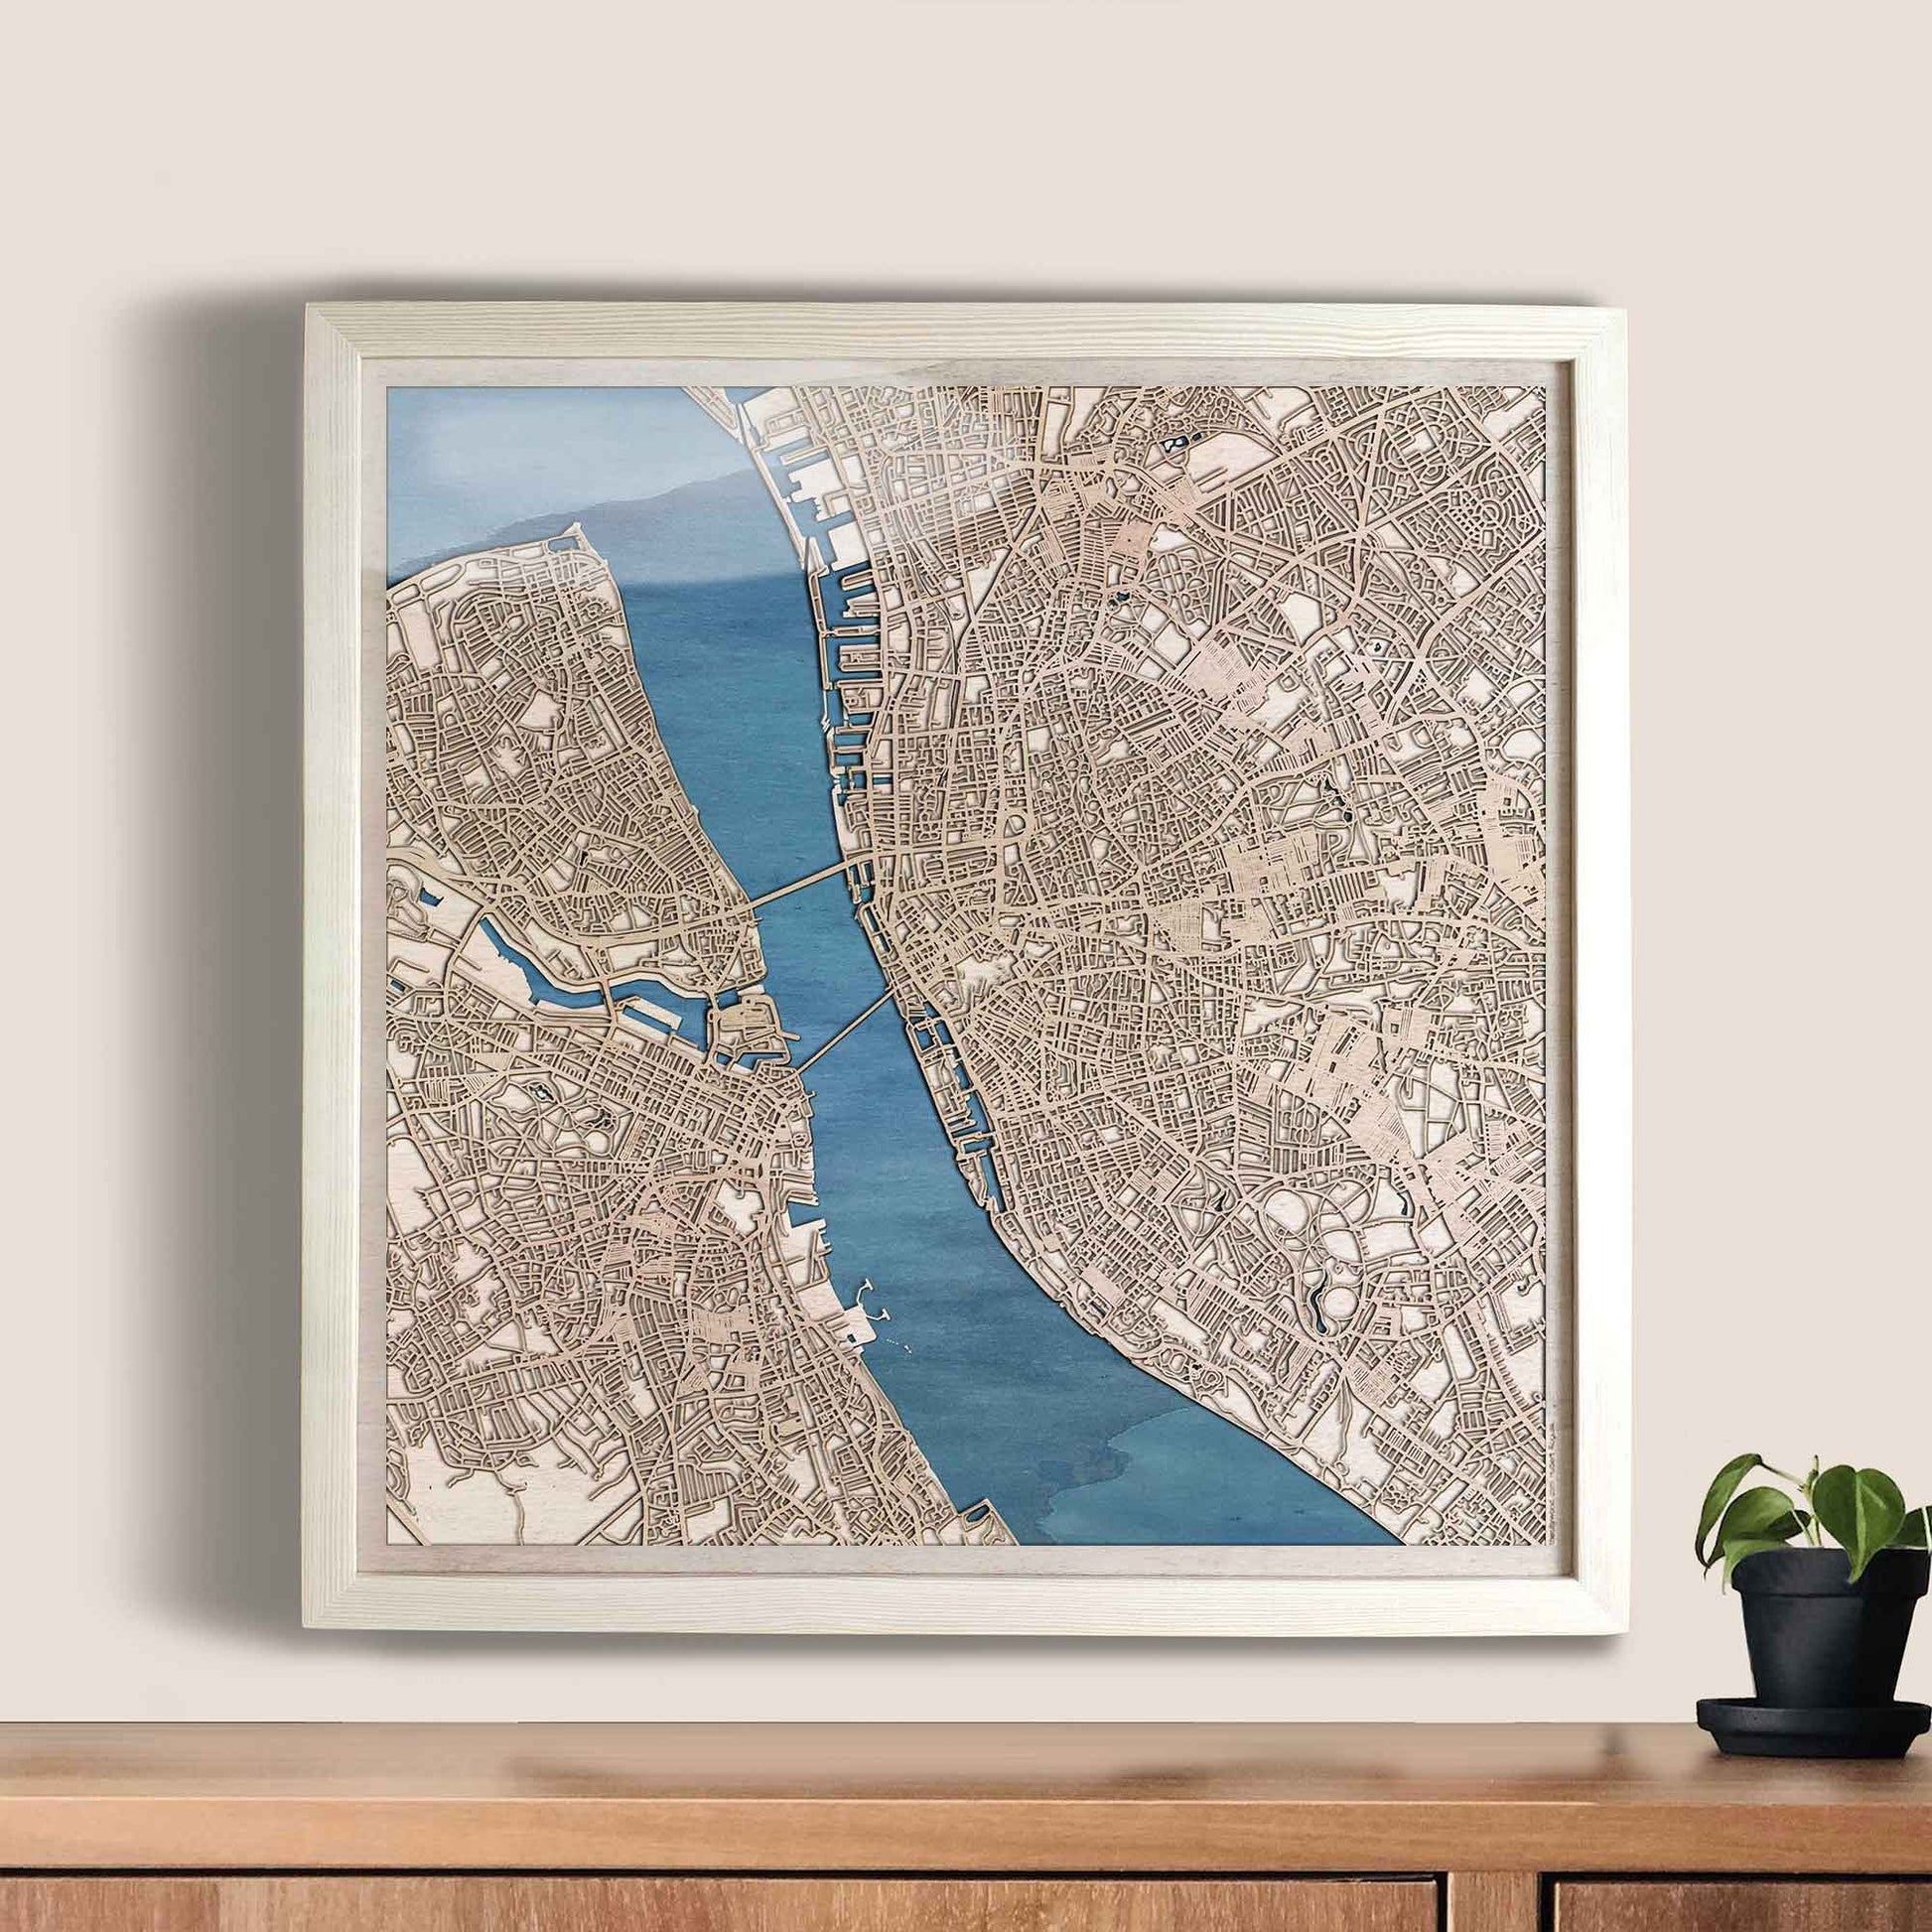 Liverpool Wooden Map by CityWood - Custom Wood Map Art - Unique Laser Cut Engraved - Anniversary Gift